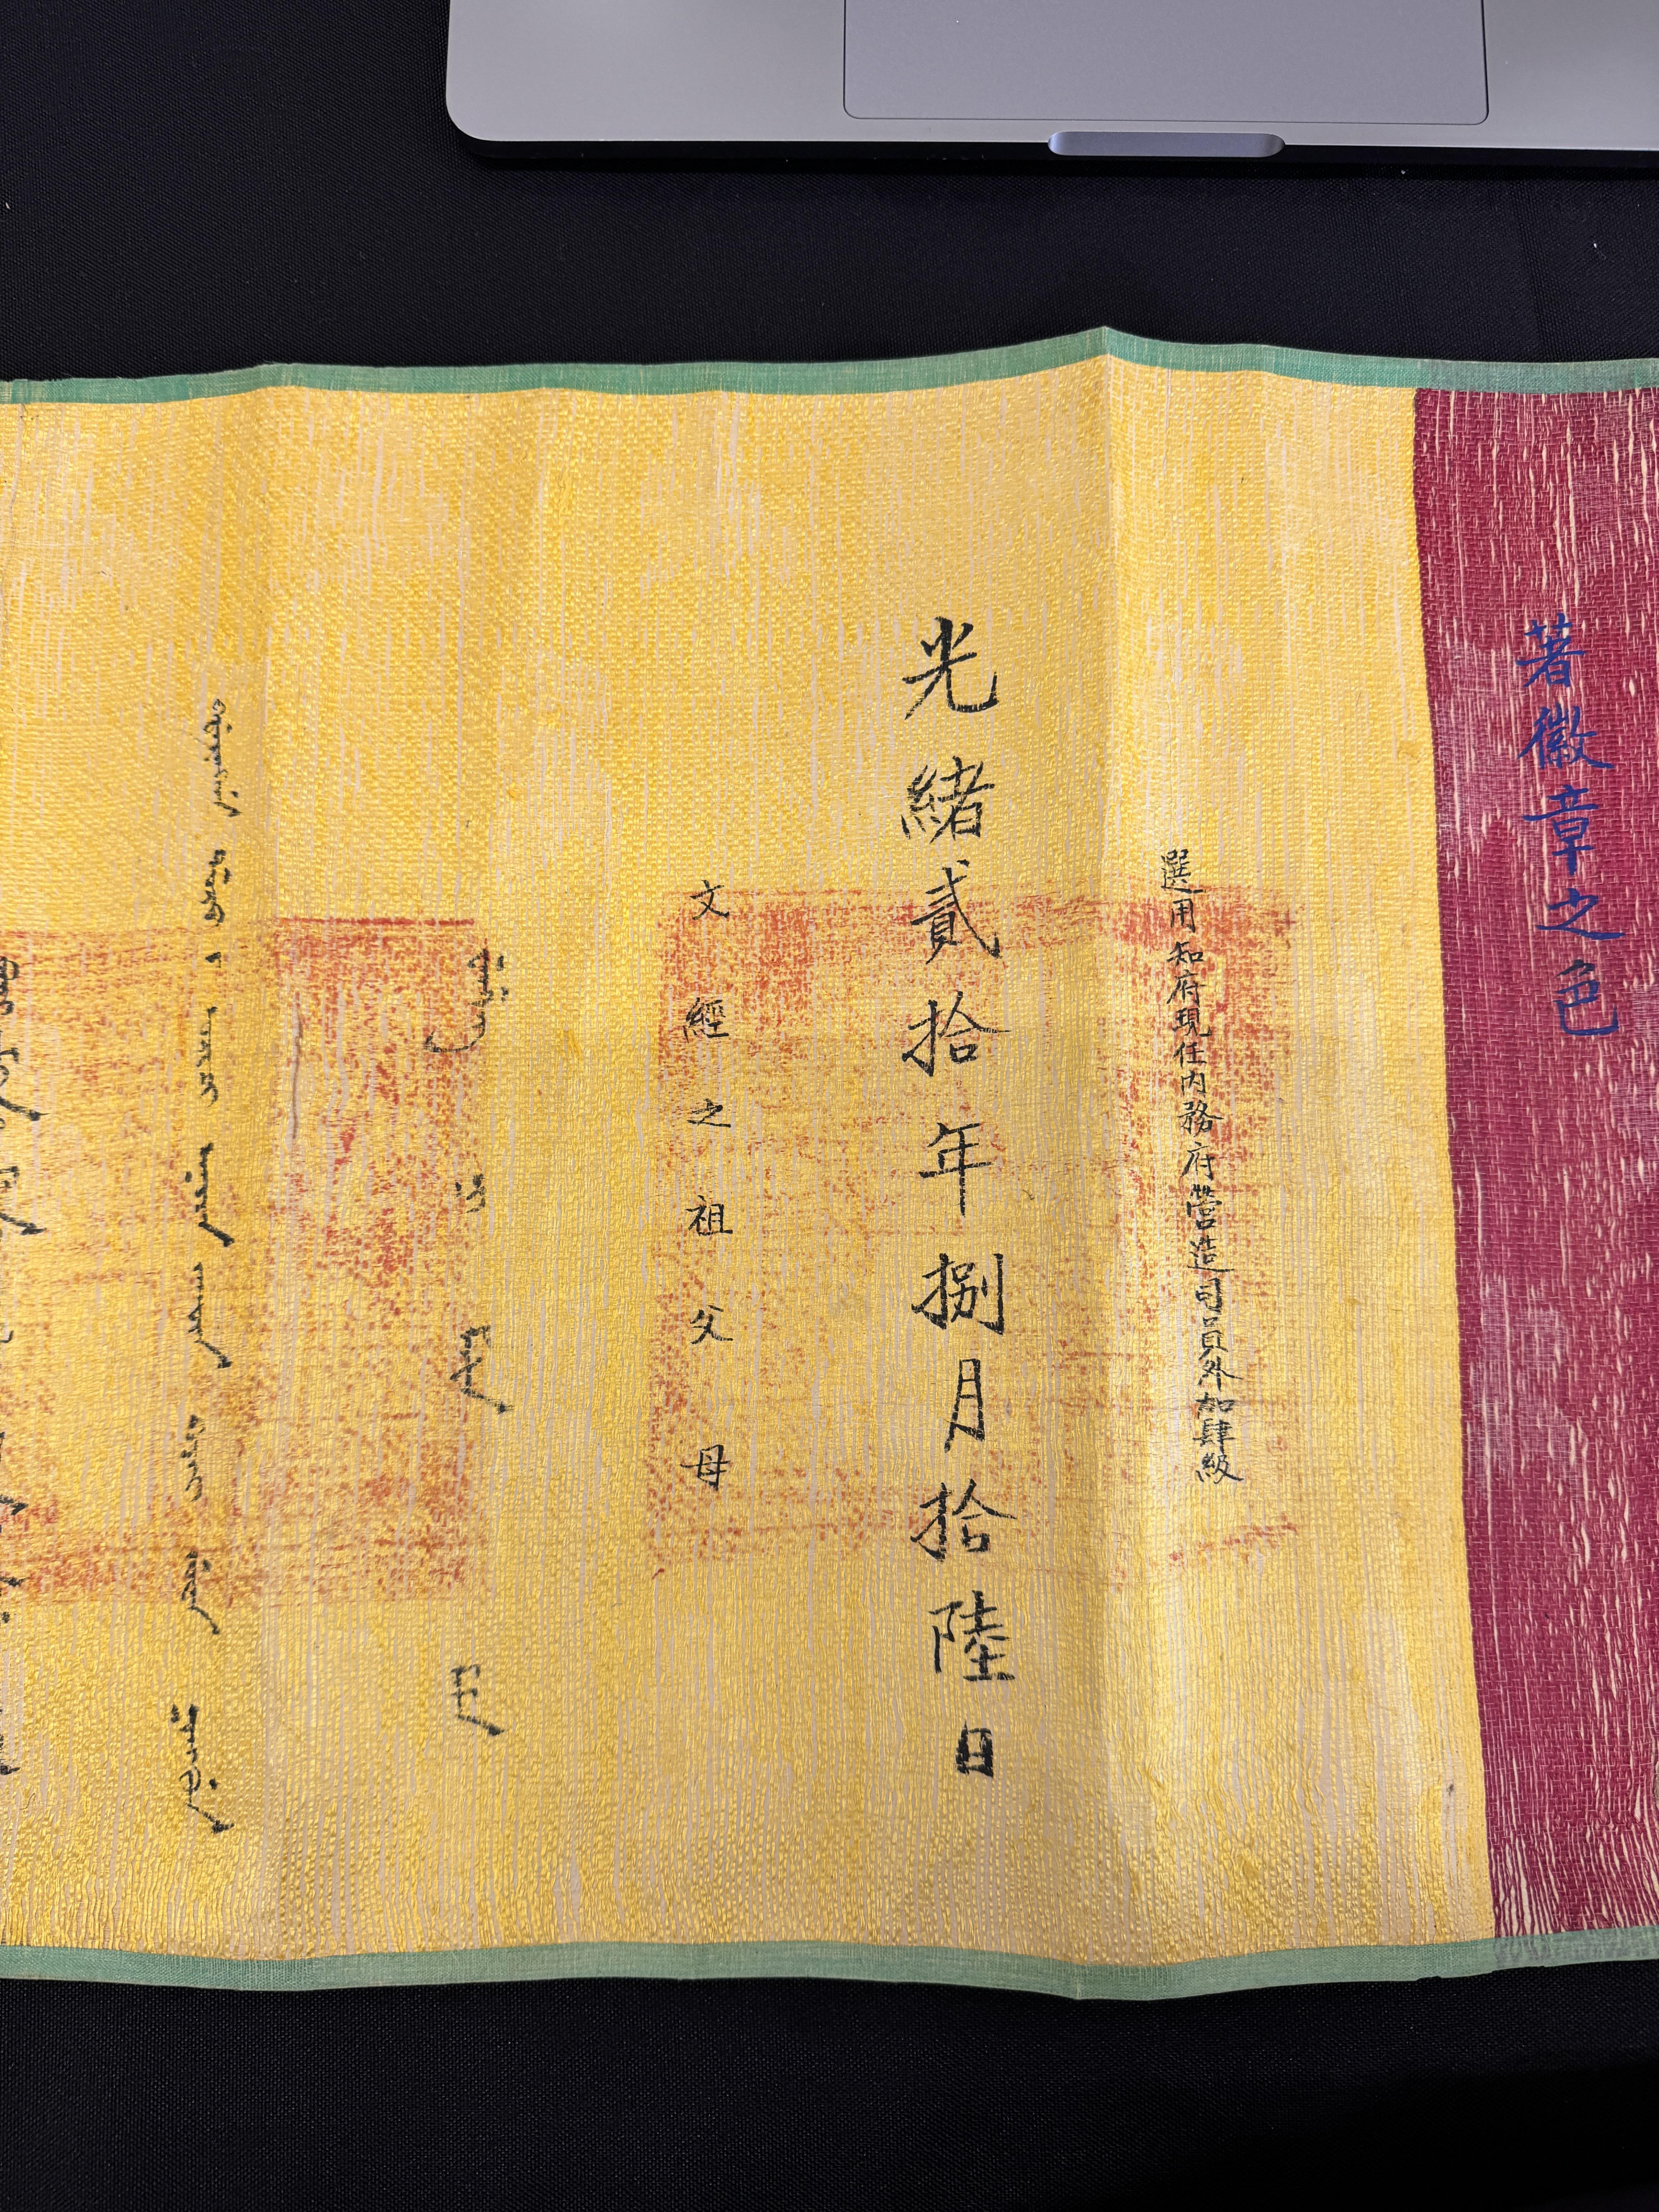 A CHINESE IMPERIAL EDICT HANDSCROLL 清光緒 1894年 世襲誥命文書 - Image 21 of 30